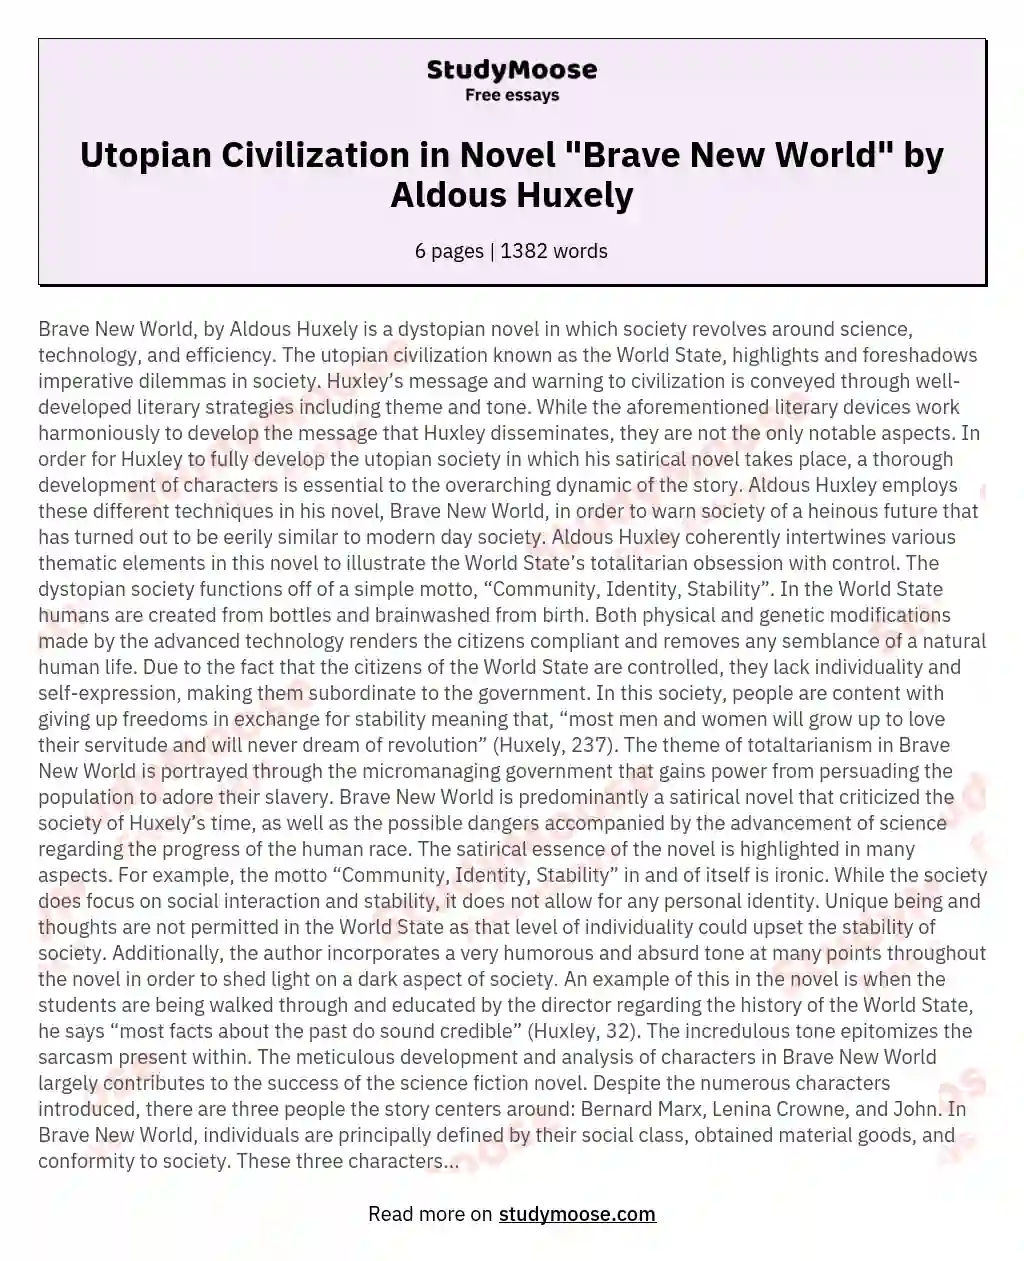 Utopian Civilization in Novel "Brave New World" by Aldous Huxely